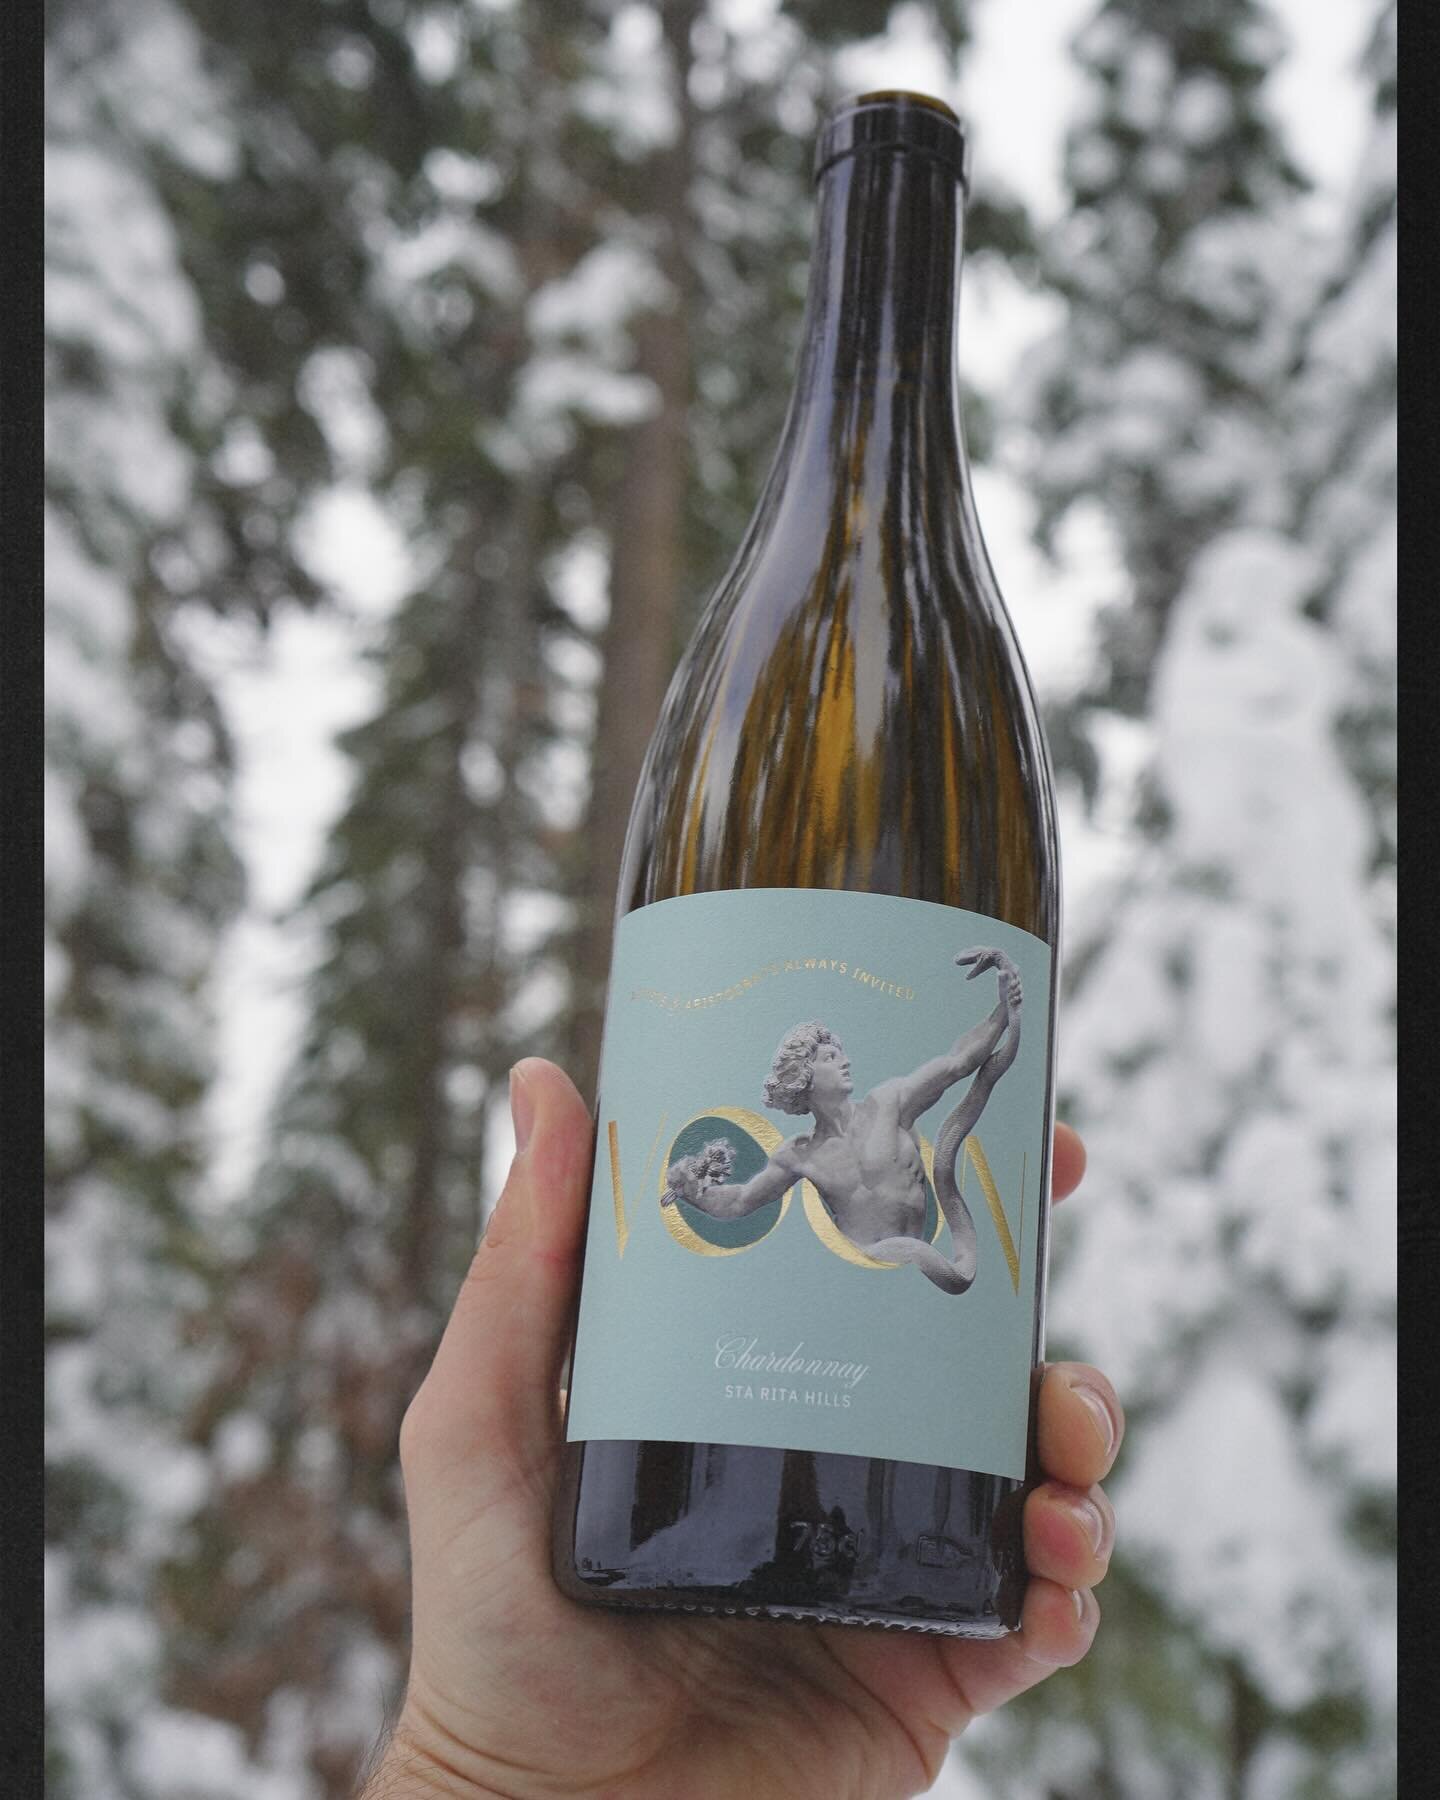 Keep your cool with VOON&rsquo;s Chardonnay &ndash; perfectly chilled at 50&deg;-55&deg;F.